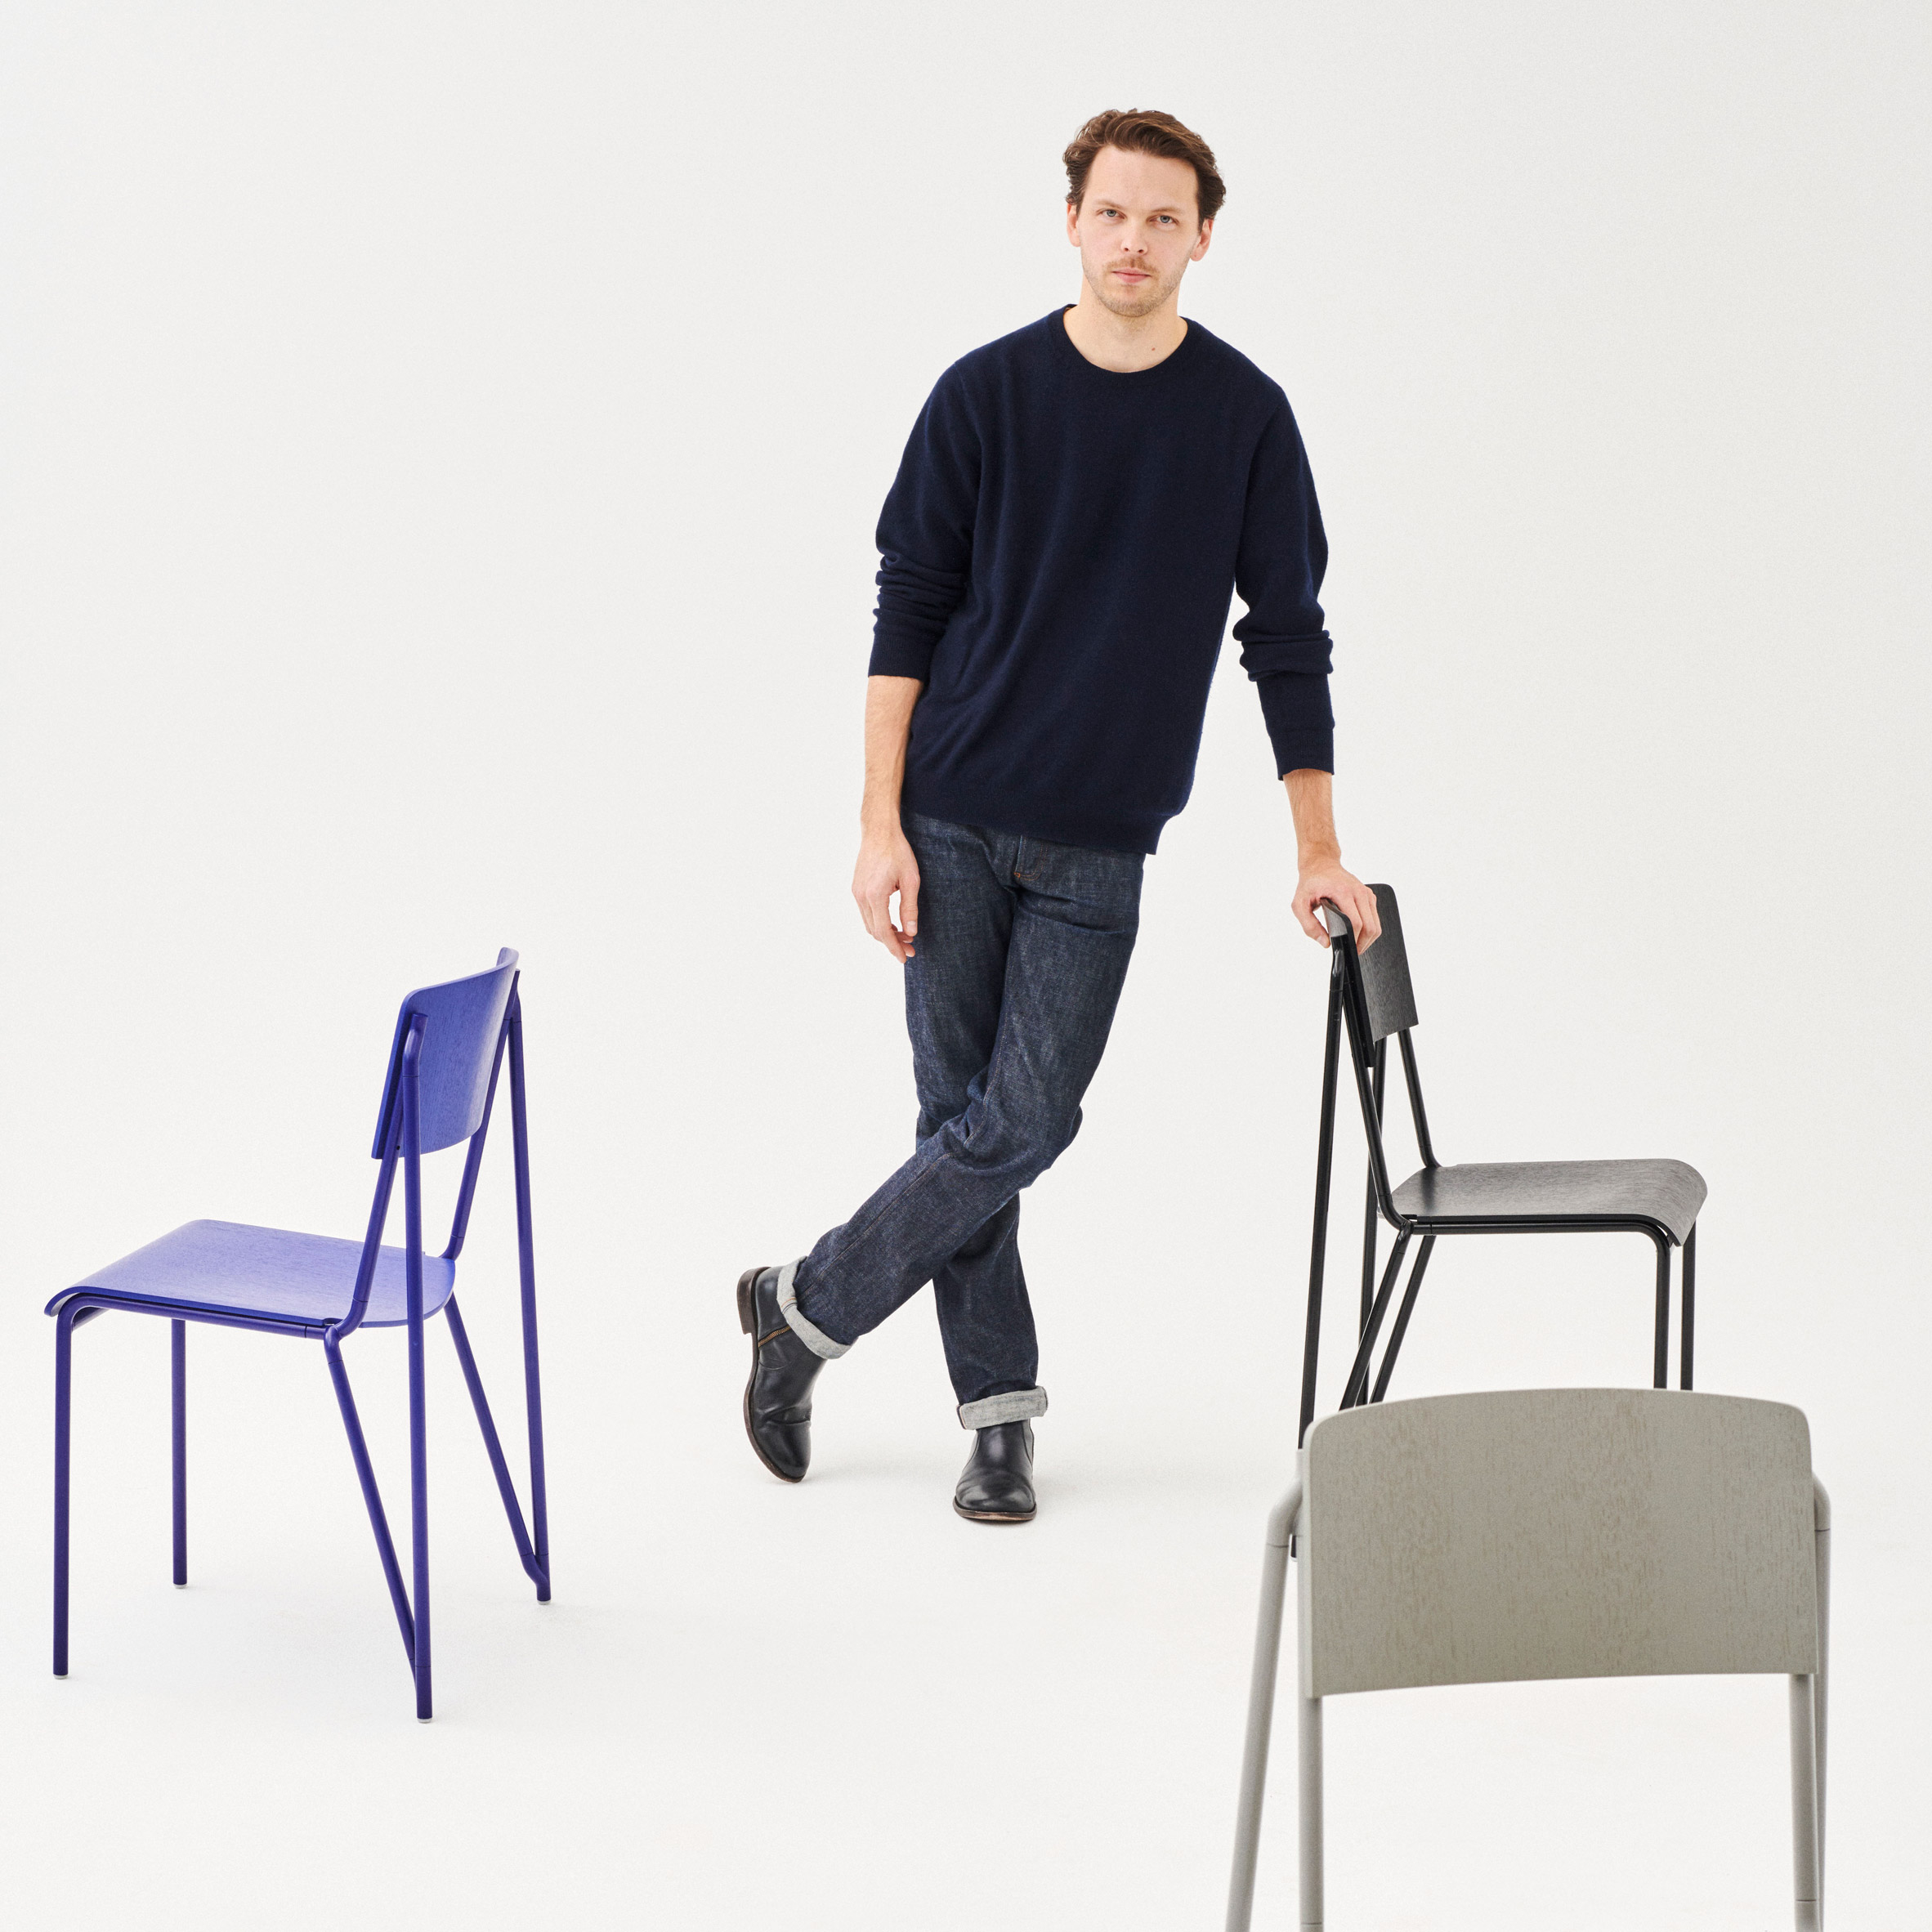 Daniel Rybakken with his Petit Standard chairs for Hay